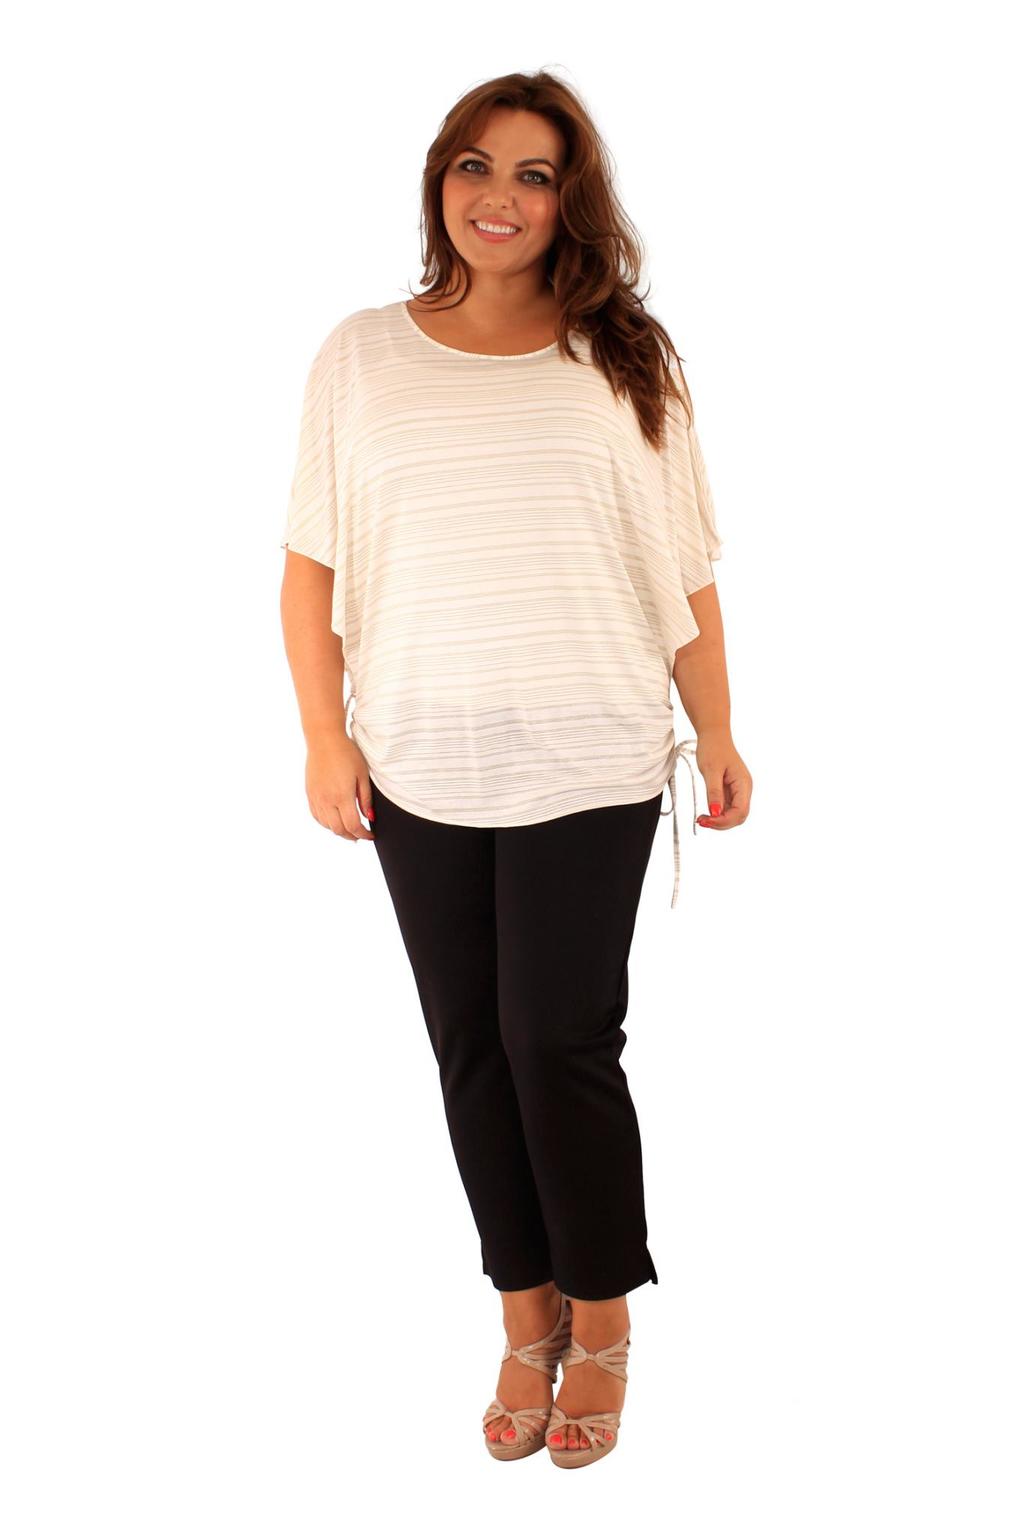 Buy Wholesale Two in One top for Plus Size Women - Fashion-book.com